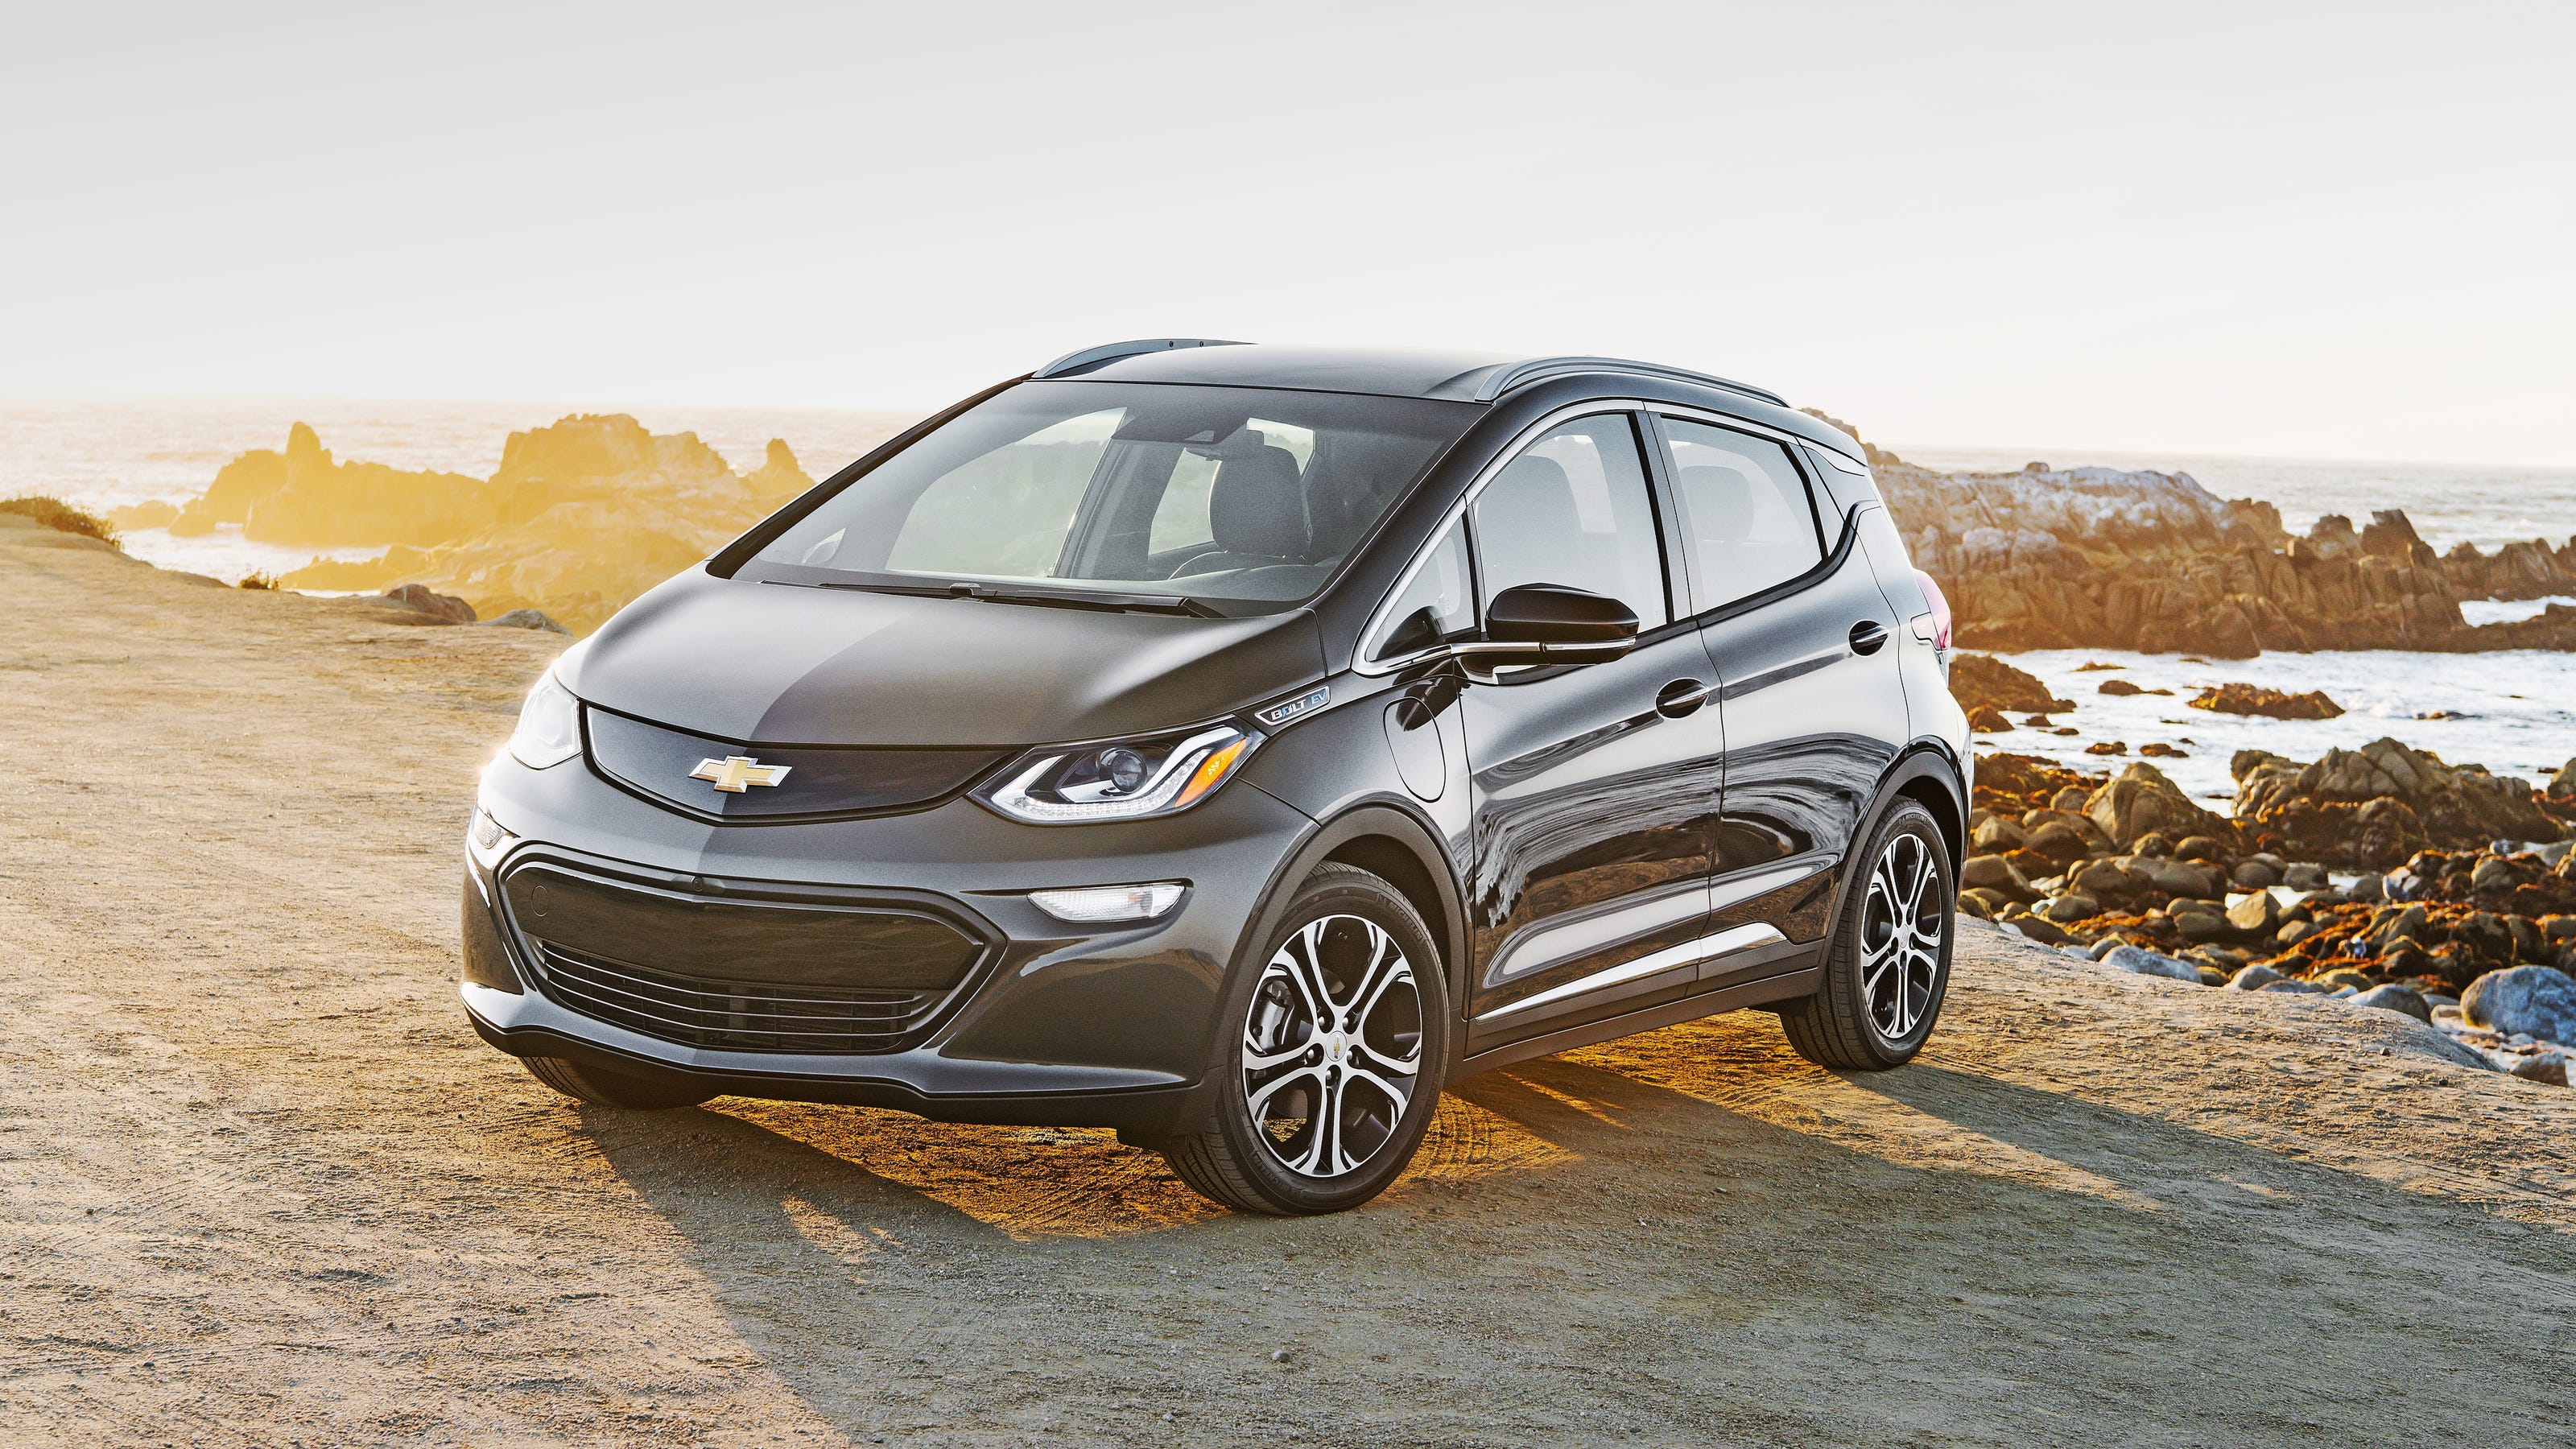 GM recalls 68,000 Chevy Bolt EVs for potential battery fires